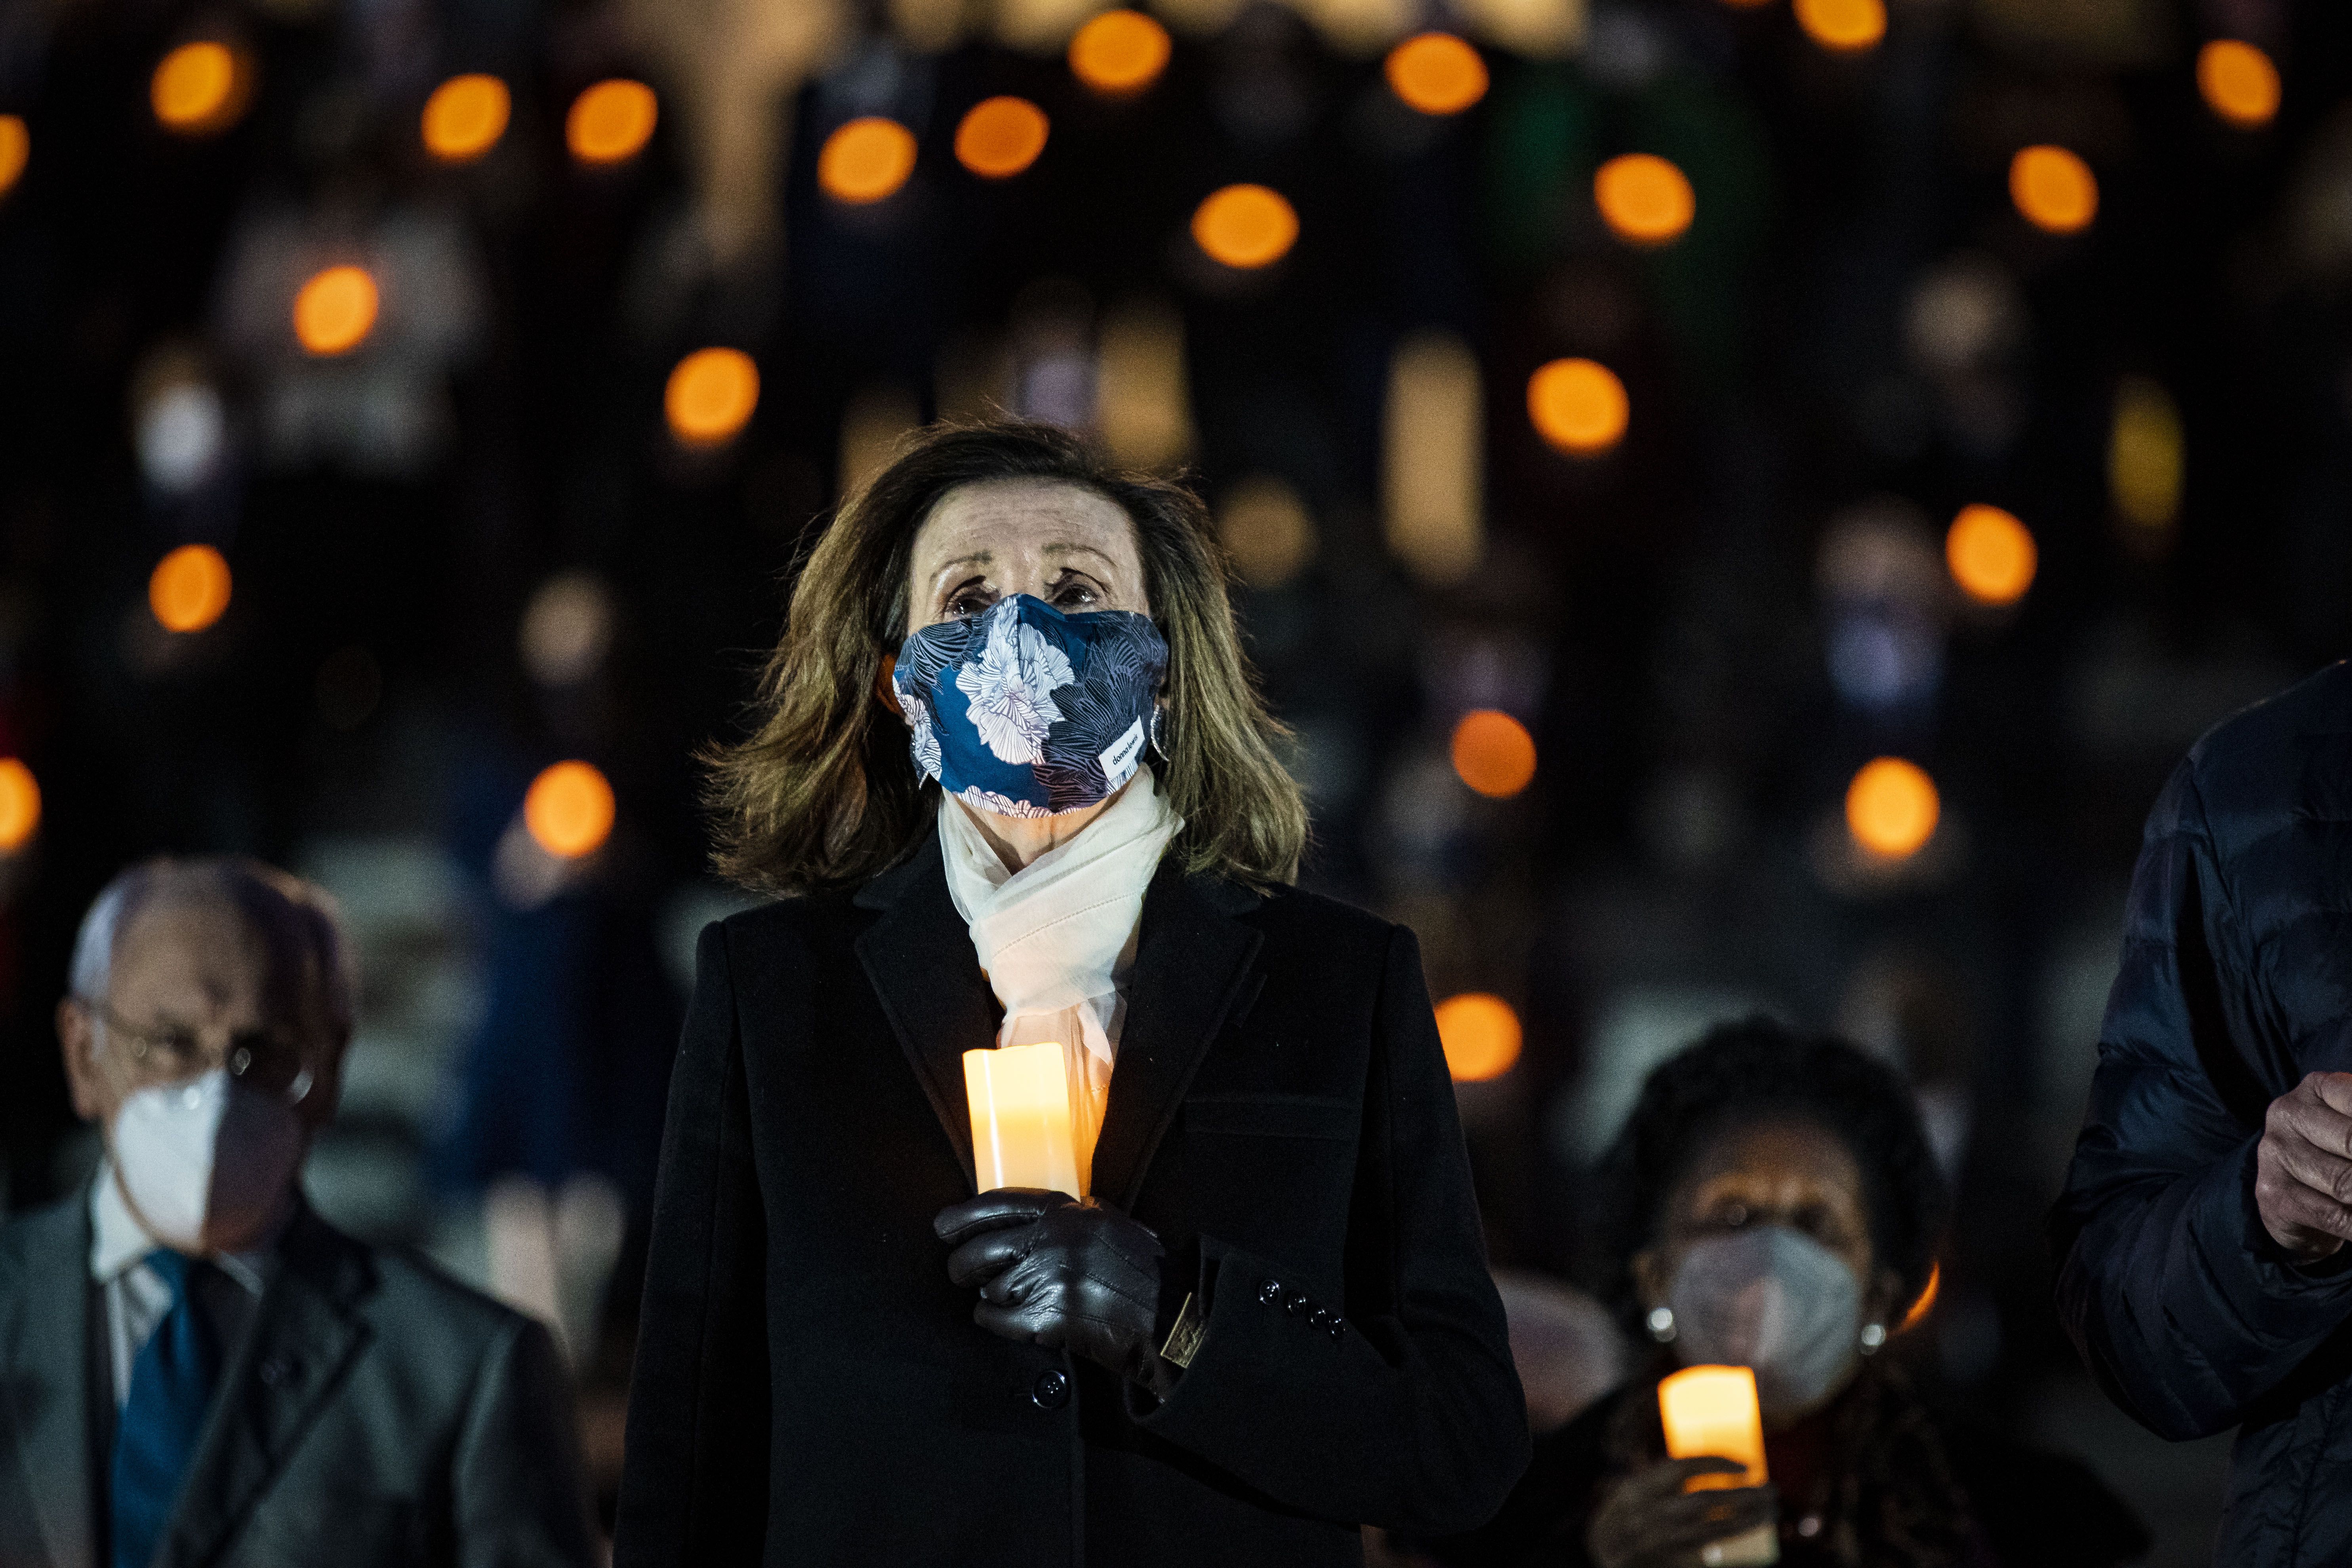 House Speaker Nancy Pelosi outside of the Capitol holding a candle on Feb. 23.